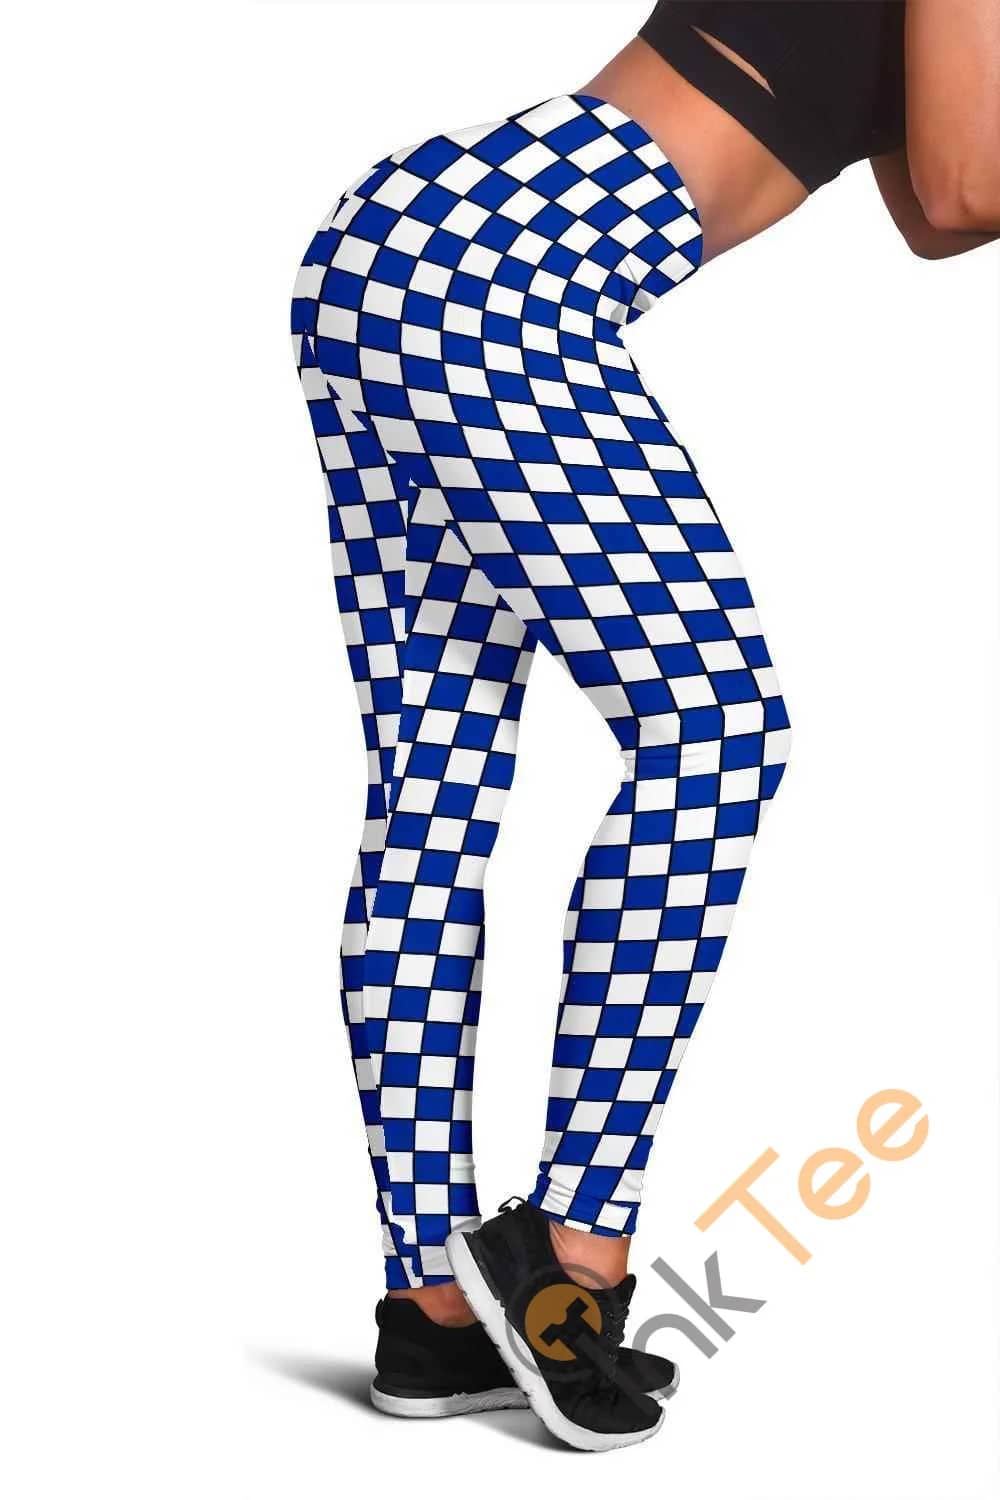 Kentucky Wildcats Fan Inspired 3D All Over Print For Yoga Fitness Checkers Women'S Leggings